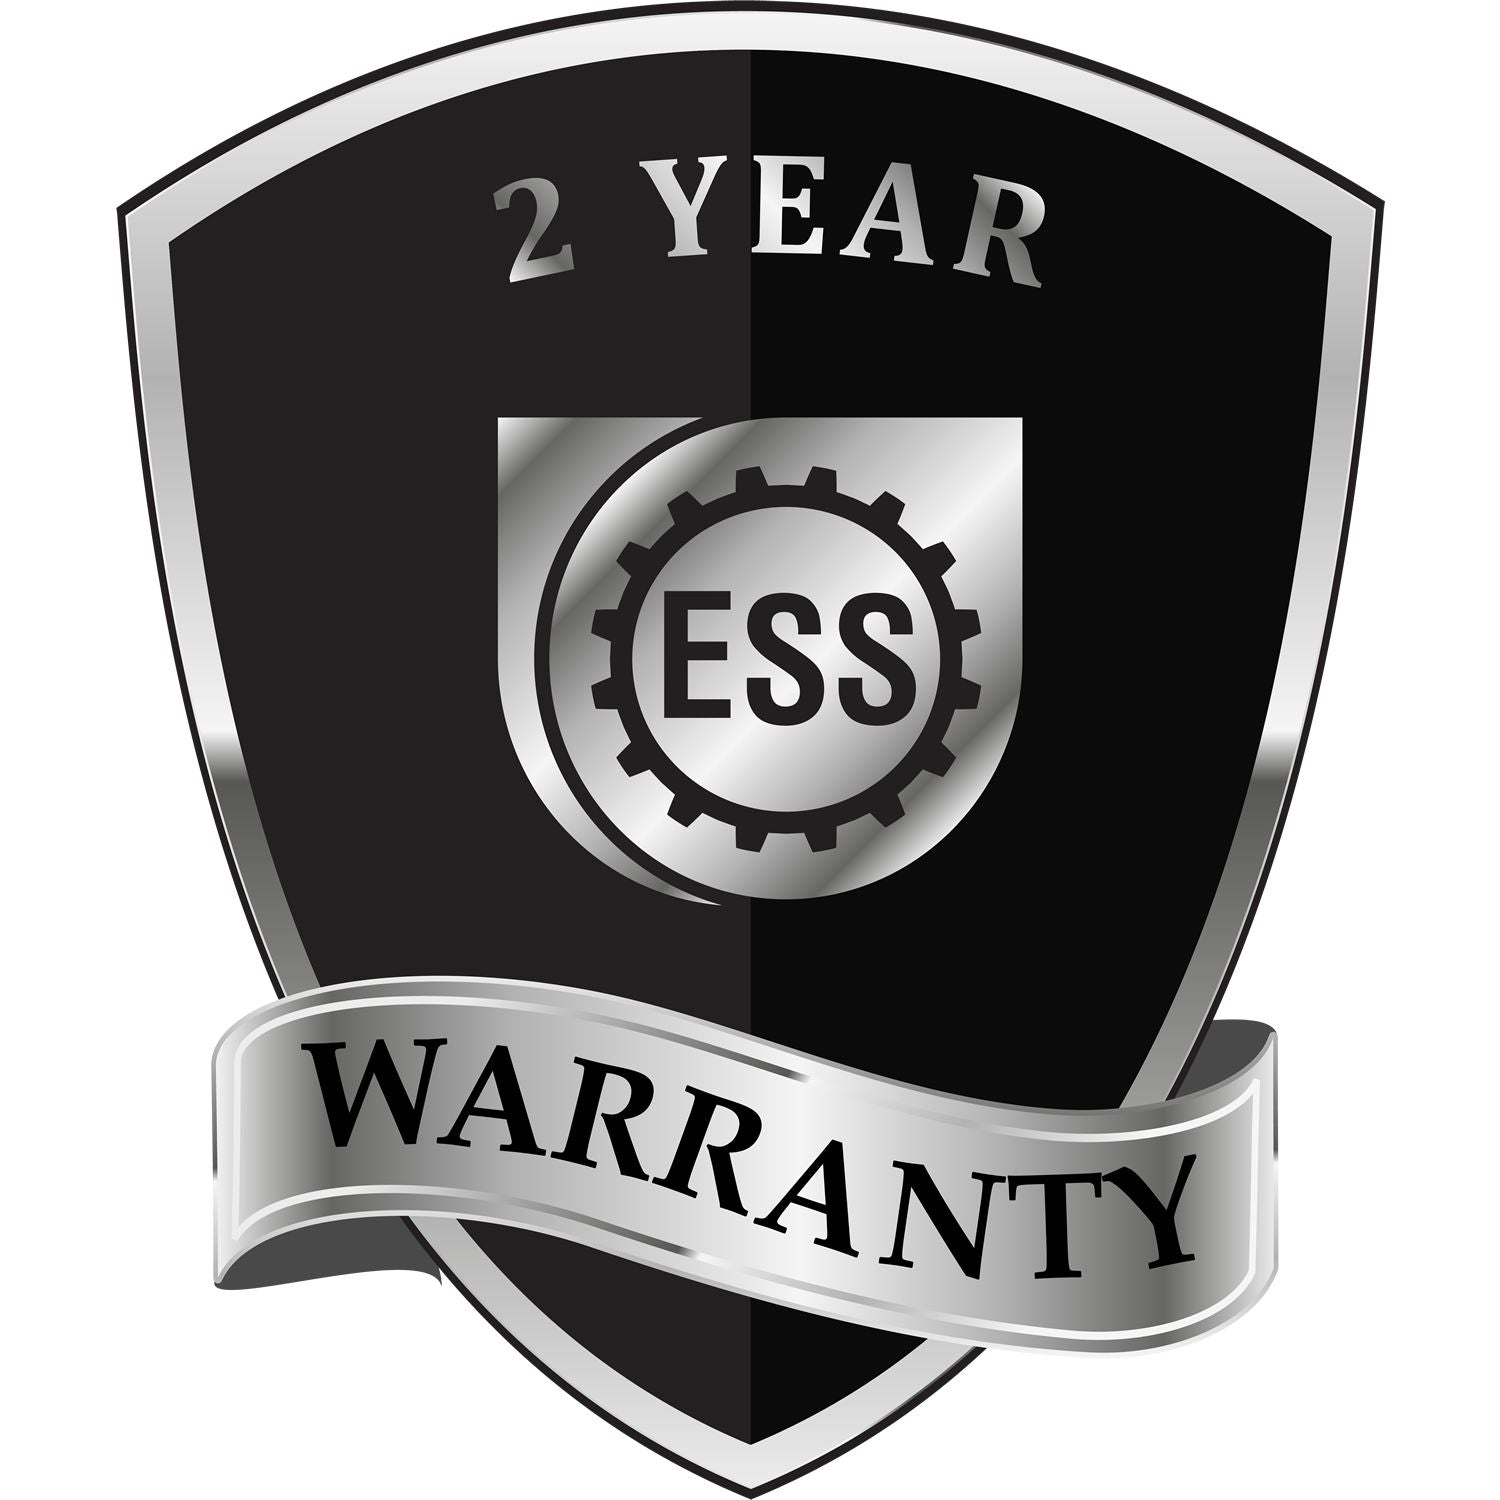 A badge or emblem showing a warranty icon for the Colorado Engineer Desk Seal